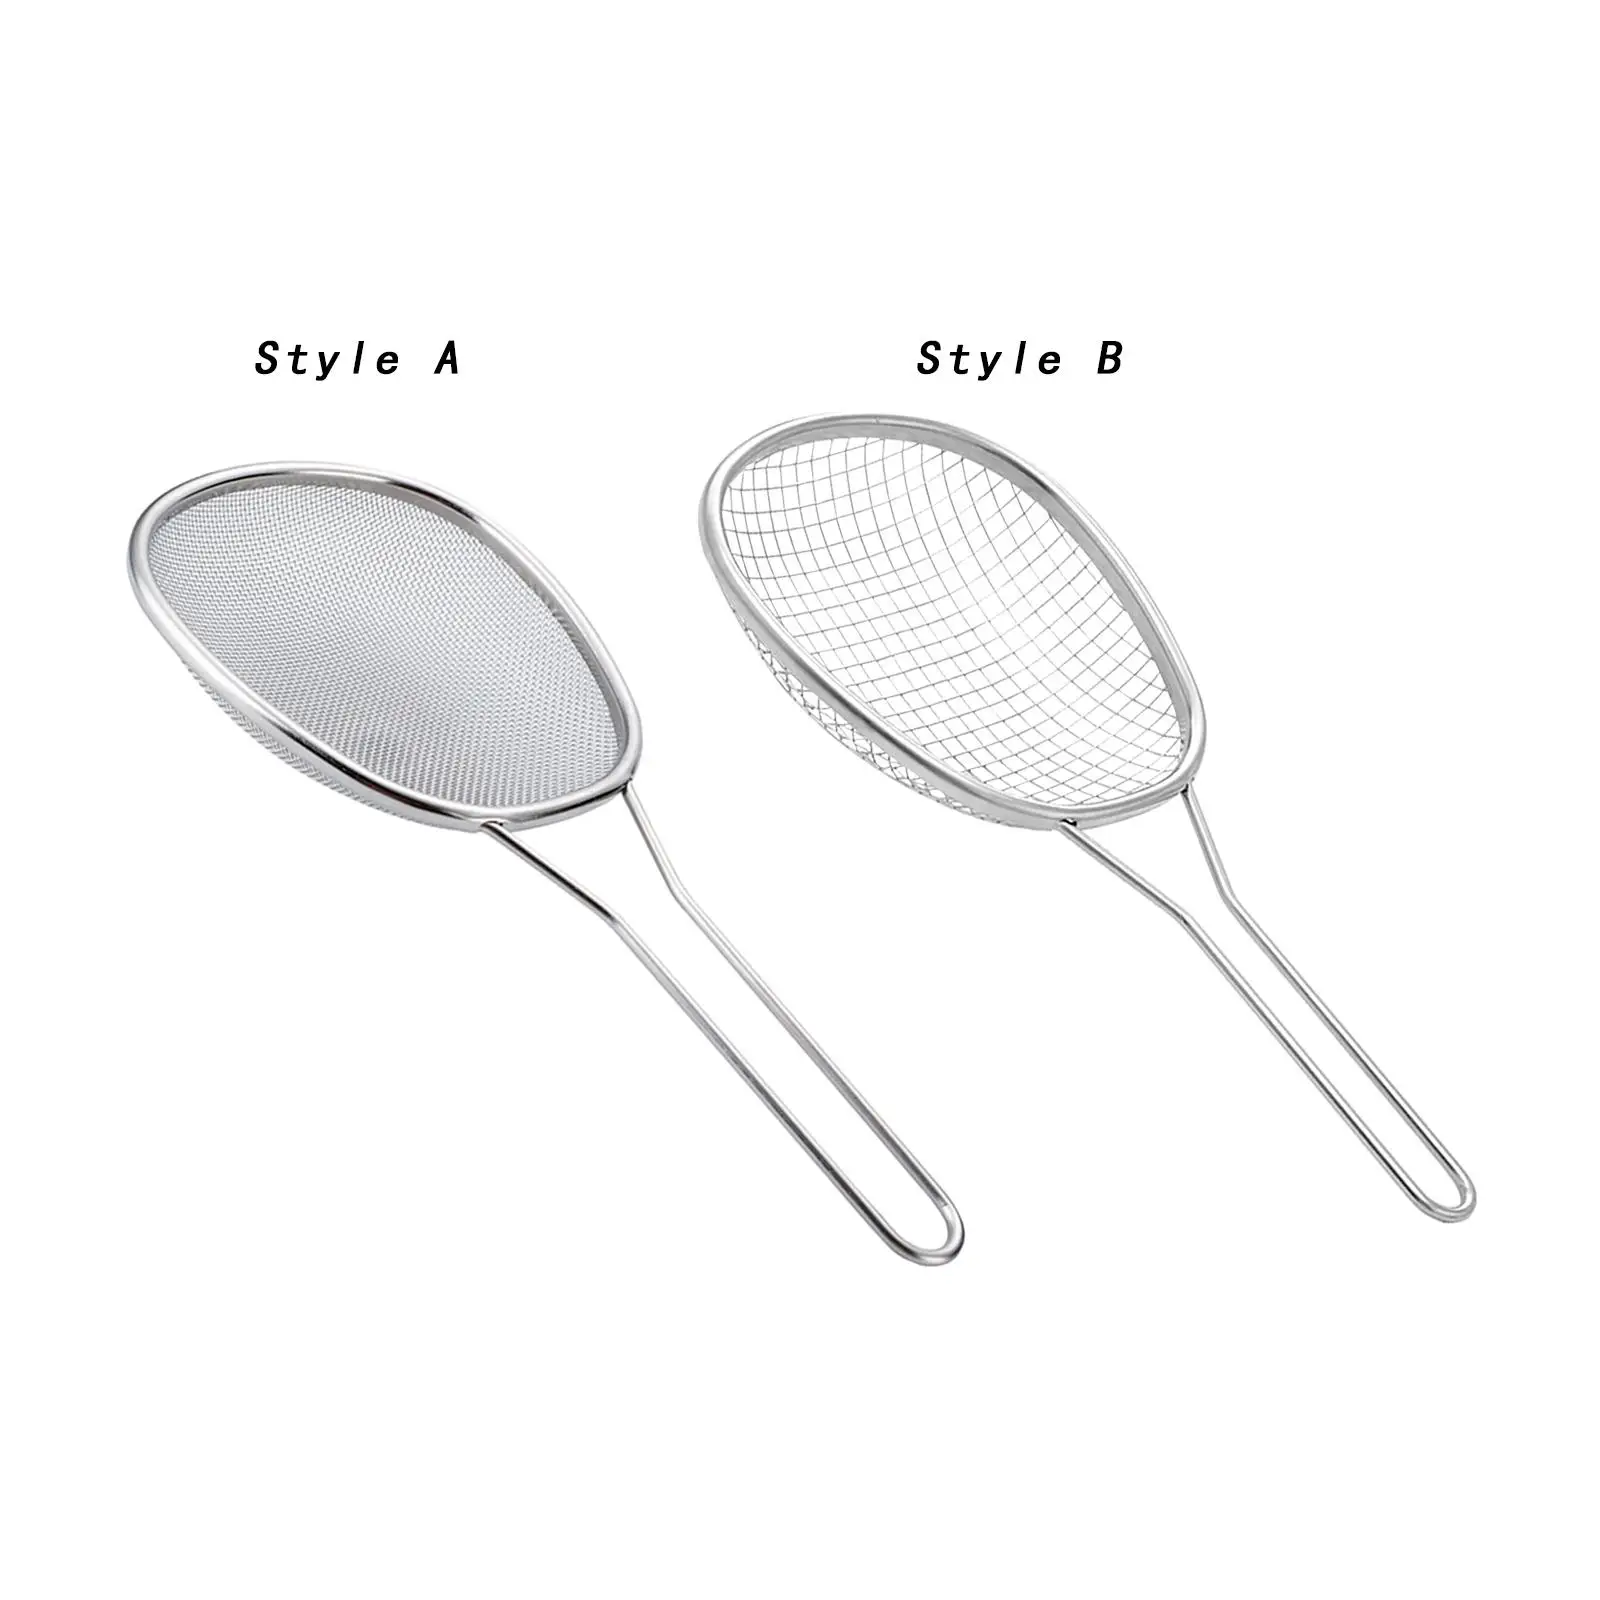 Stainless Steel Mesh Strainer with Handle Food Strainer for Tea Juice Fruits